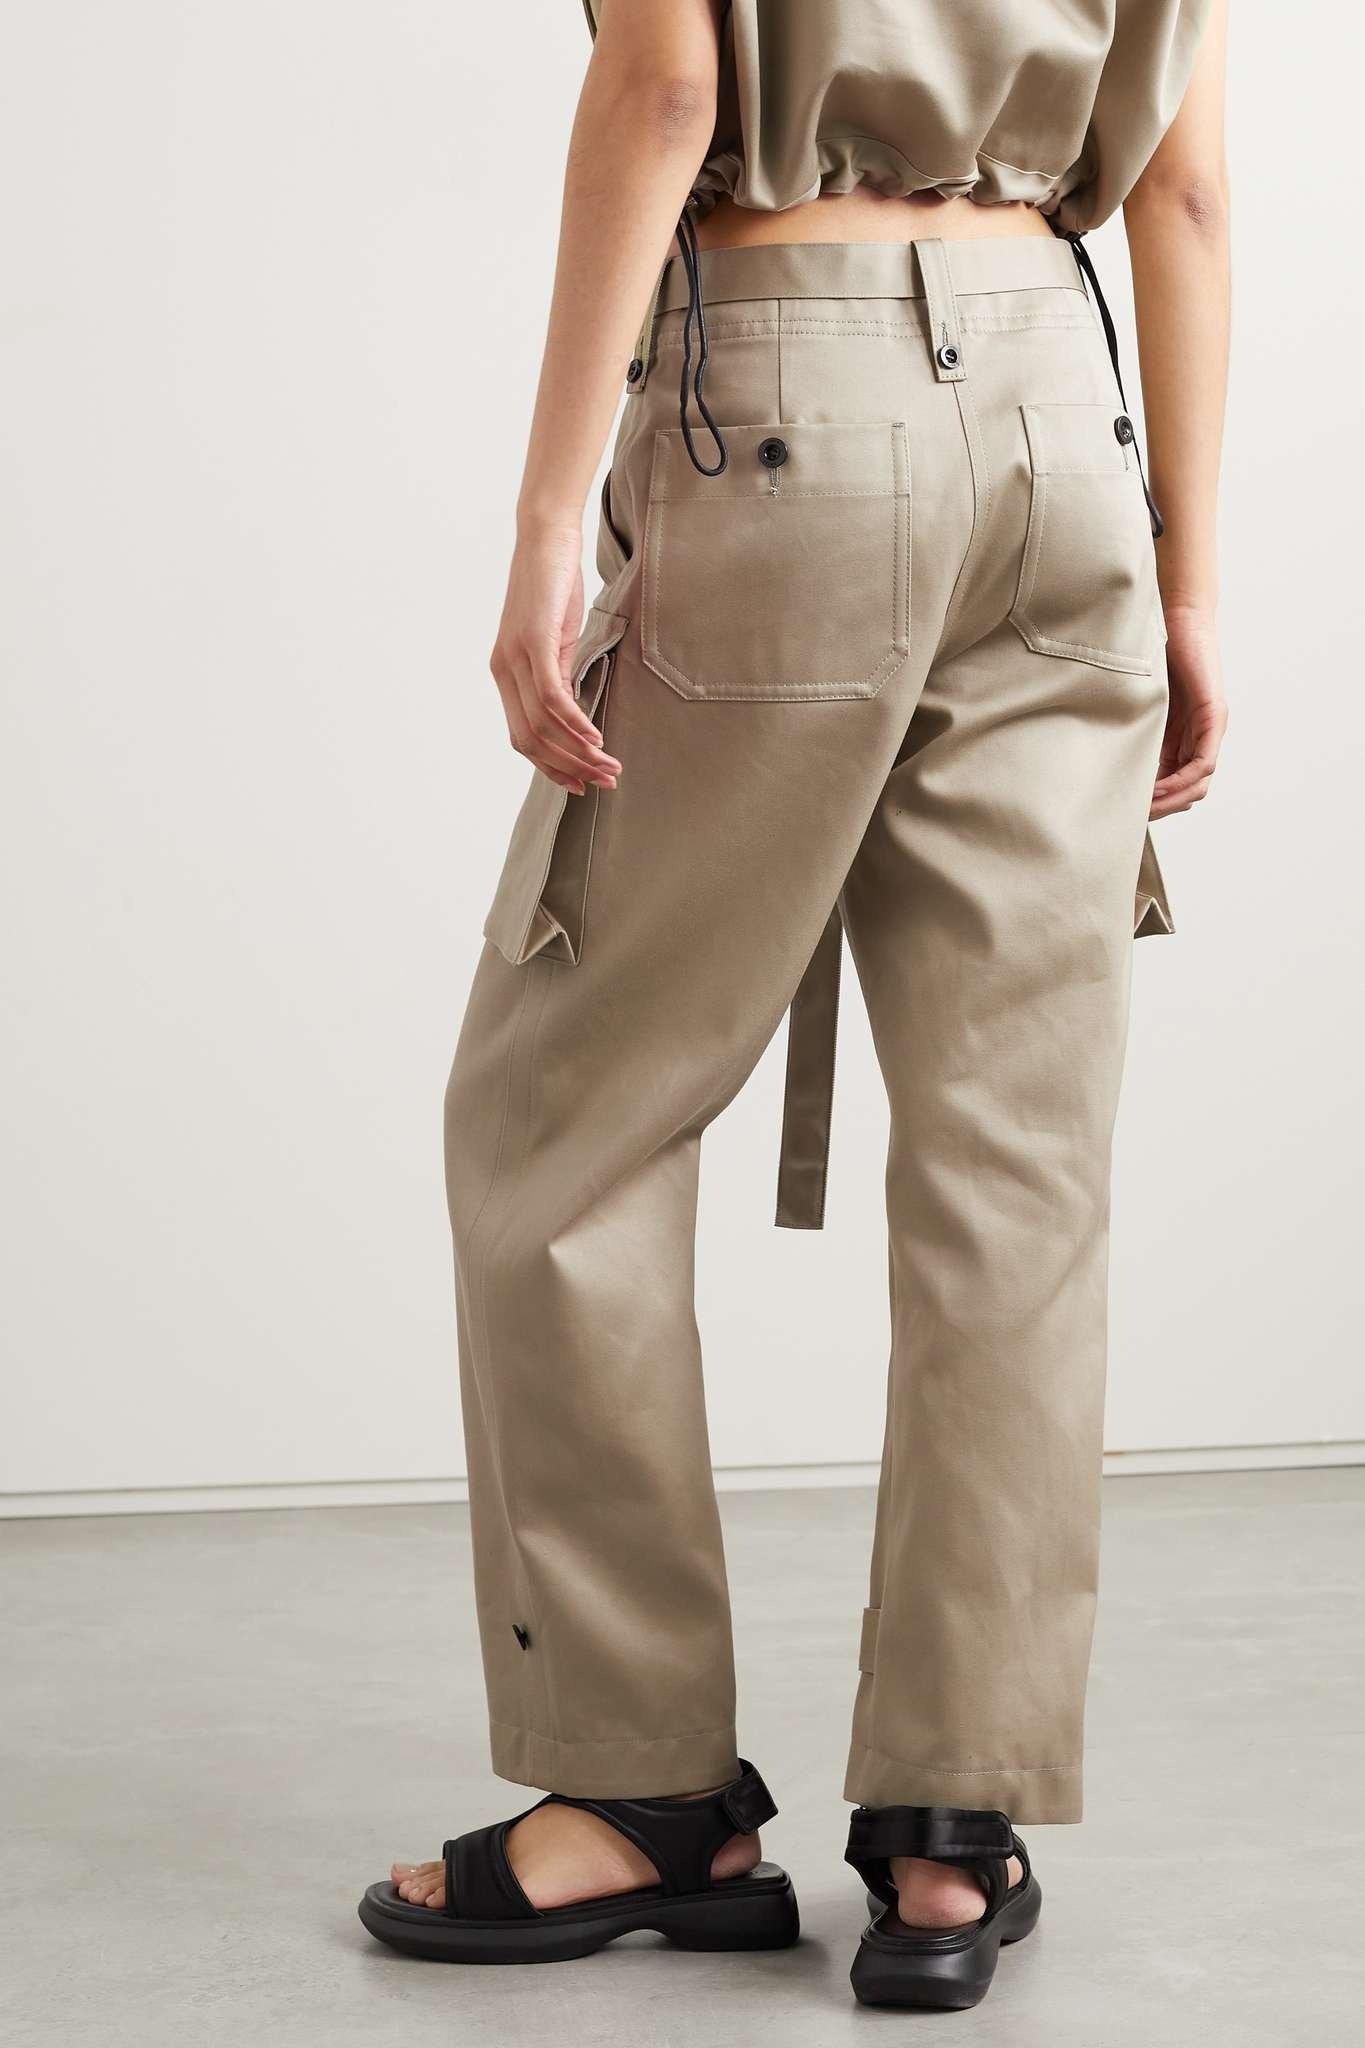 Twill tapered cargo pants